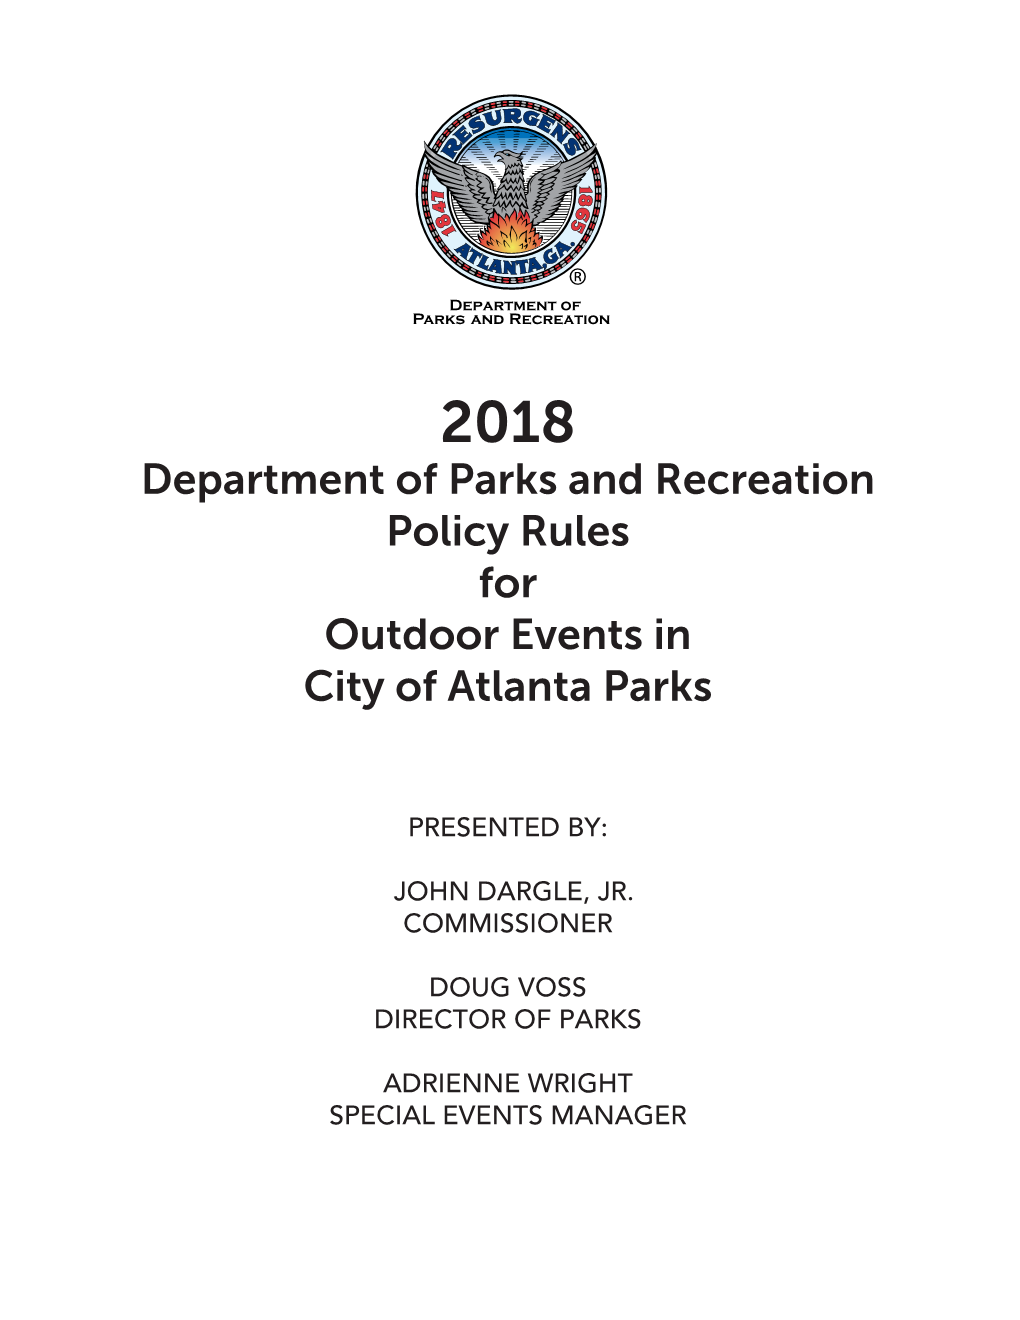 Department of Parks and Recreation Policy Rules for Outdoor Events in City of Atlanta Parks